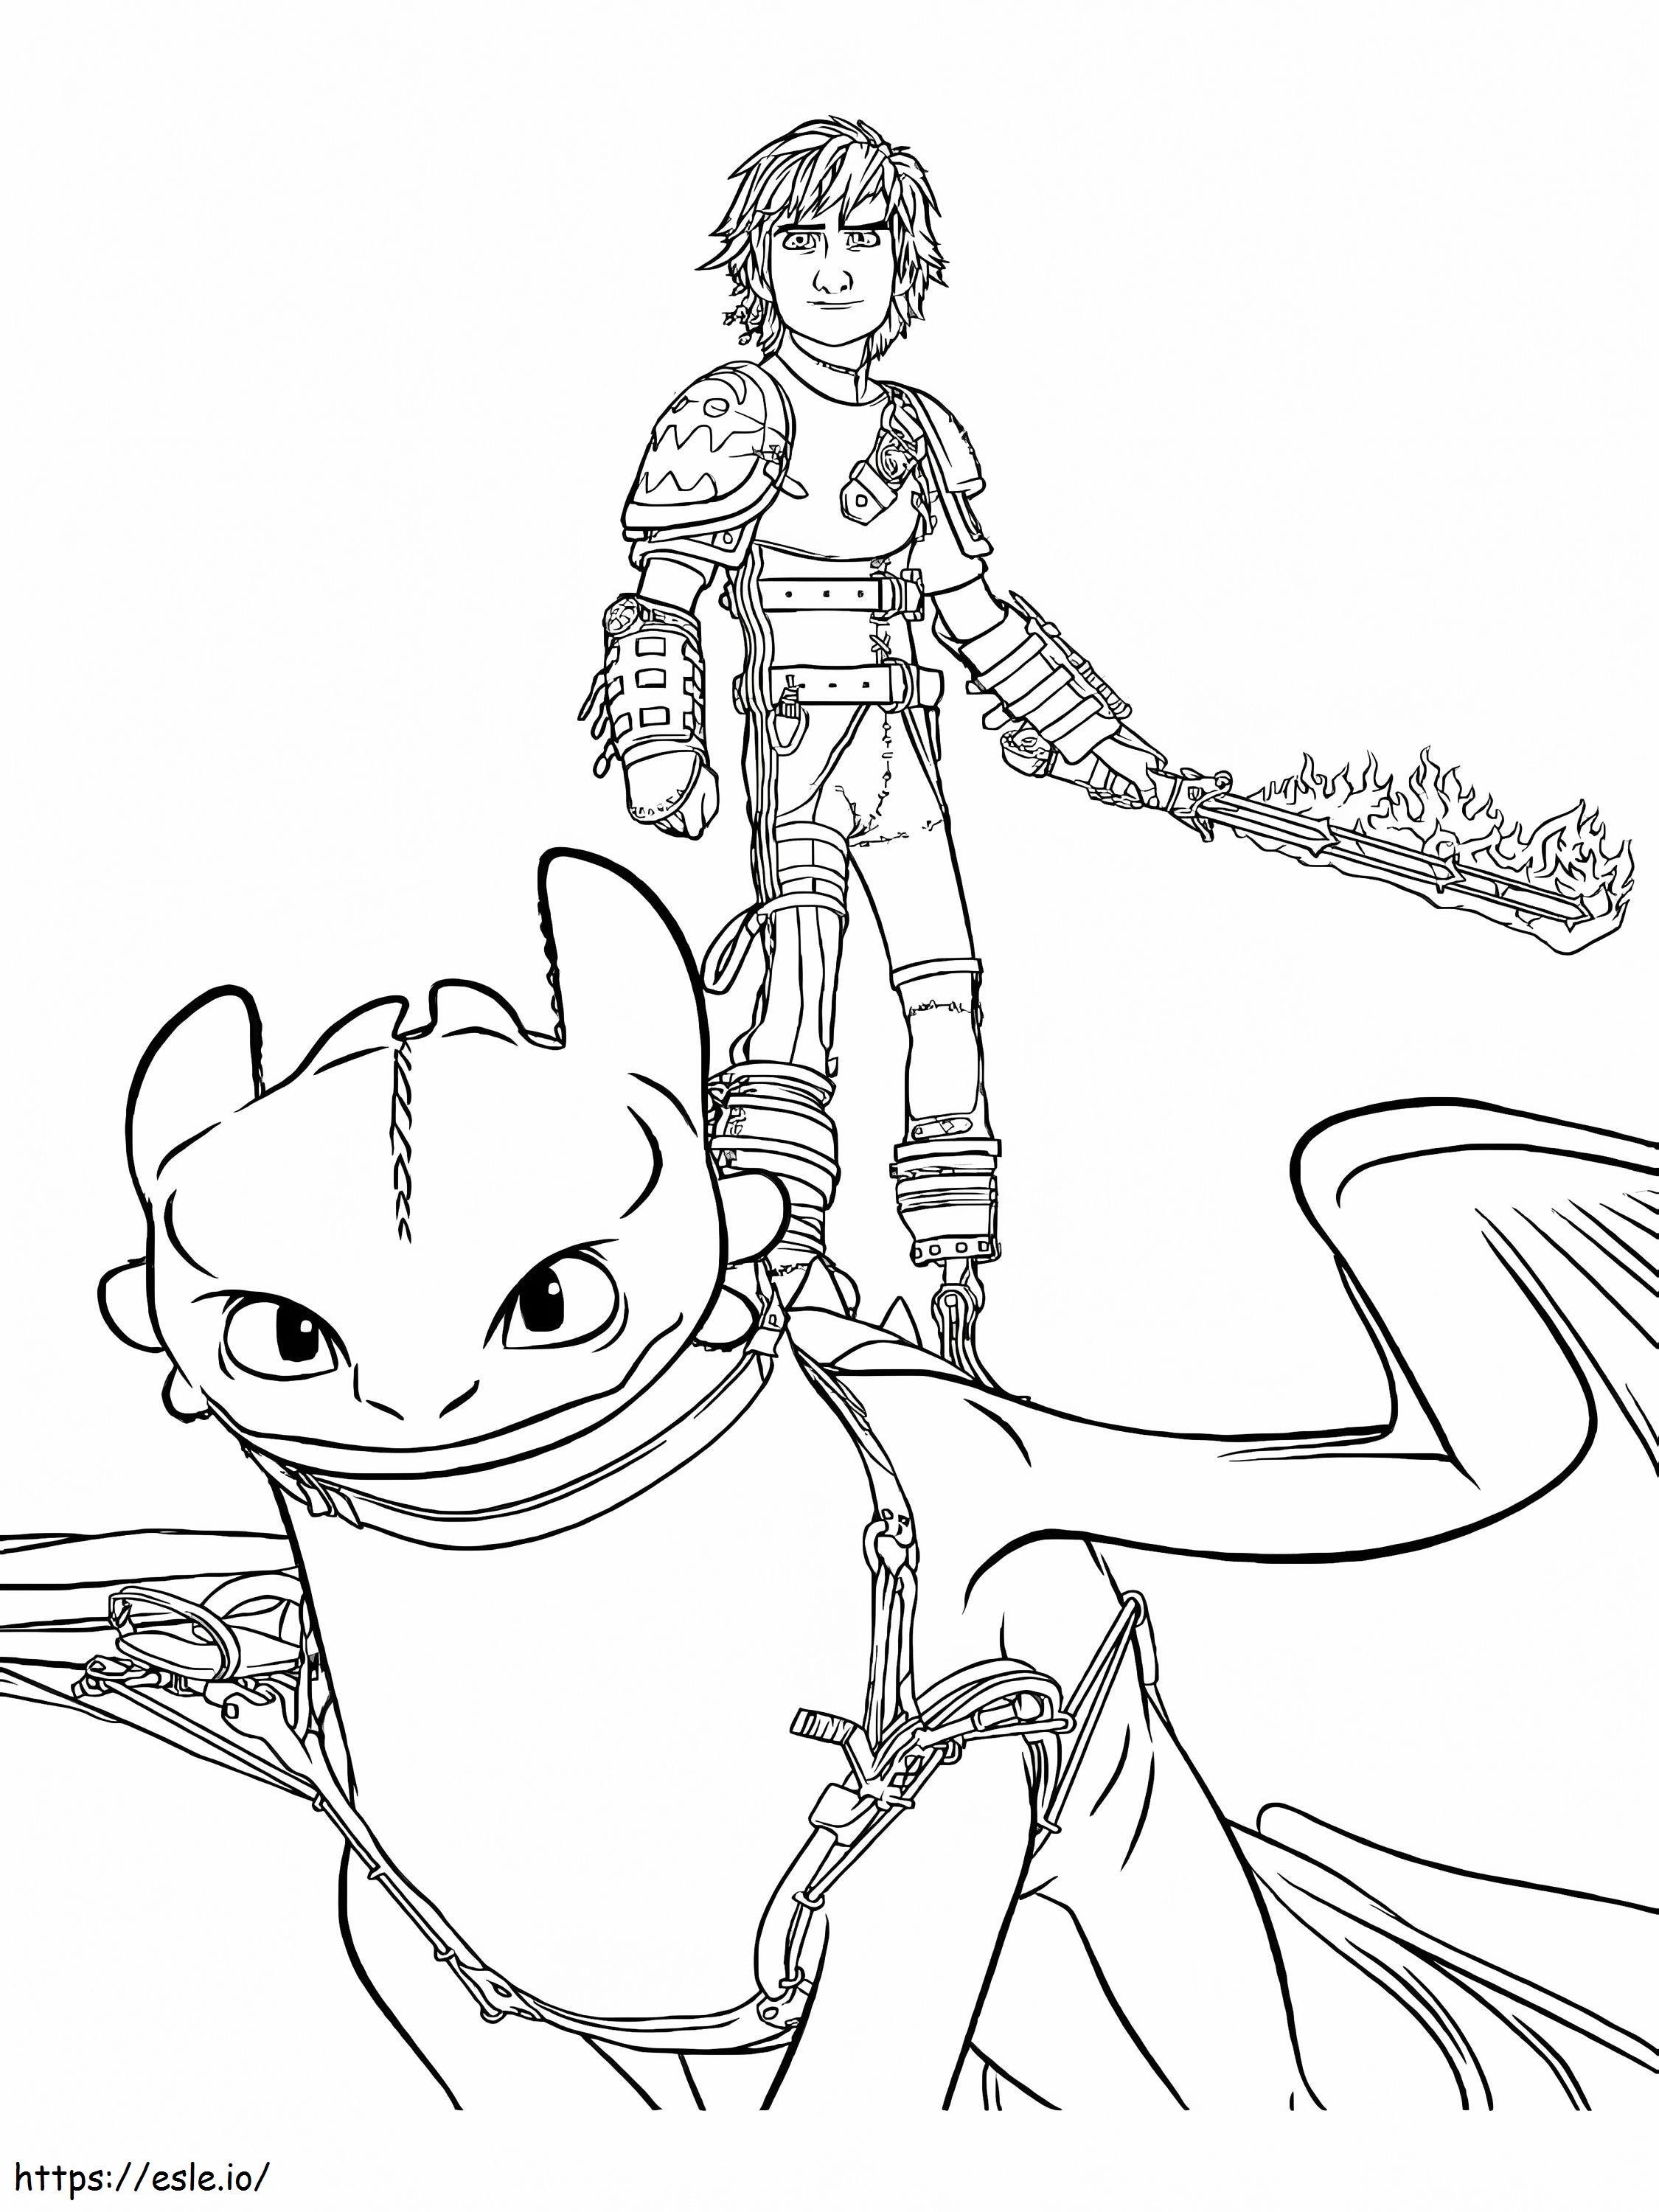 Cool Hiccup And Toothless coloring page